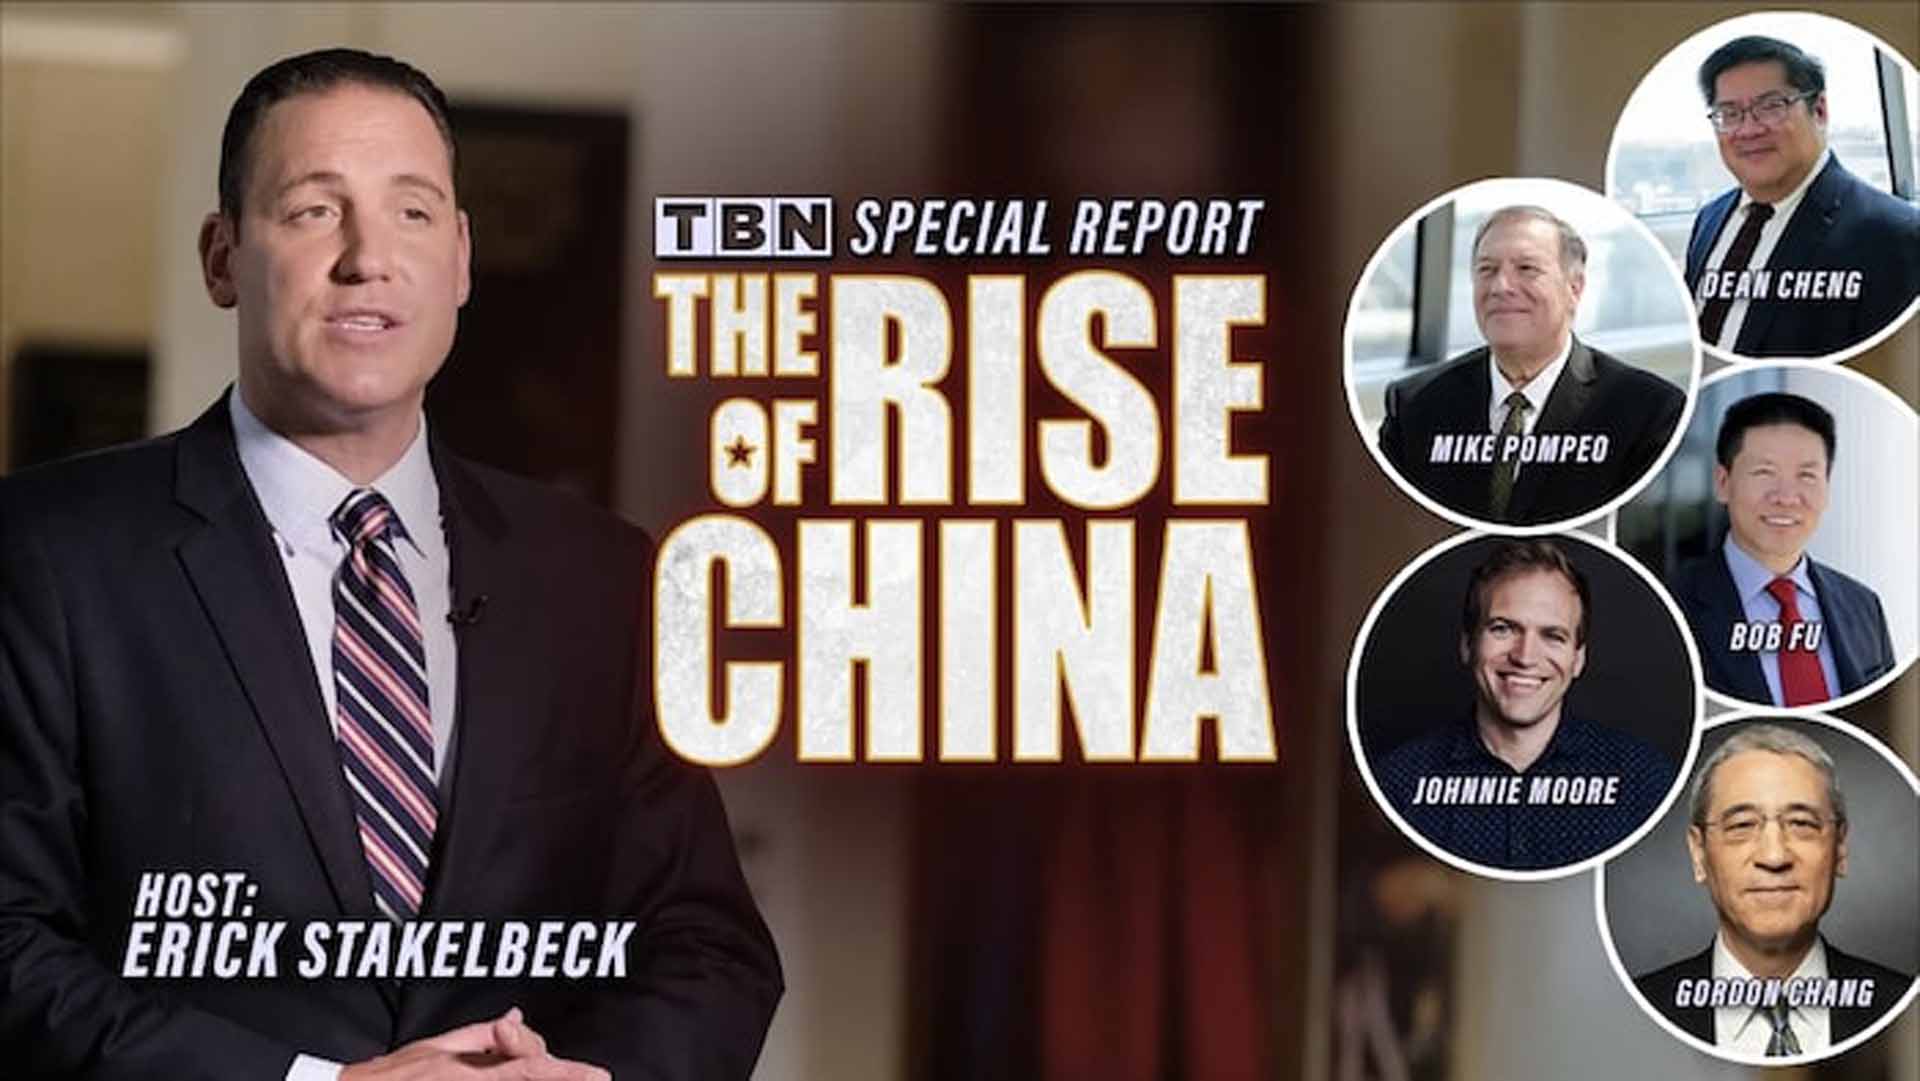 tbn_special_report_the_rise_of_china.jpeg